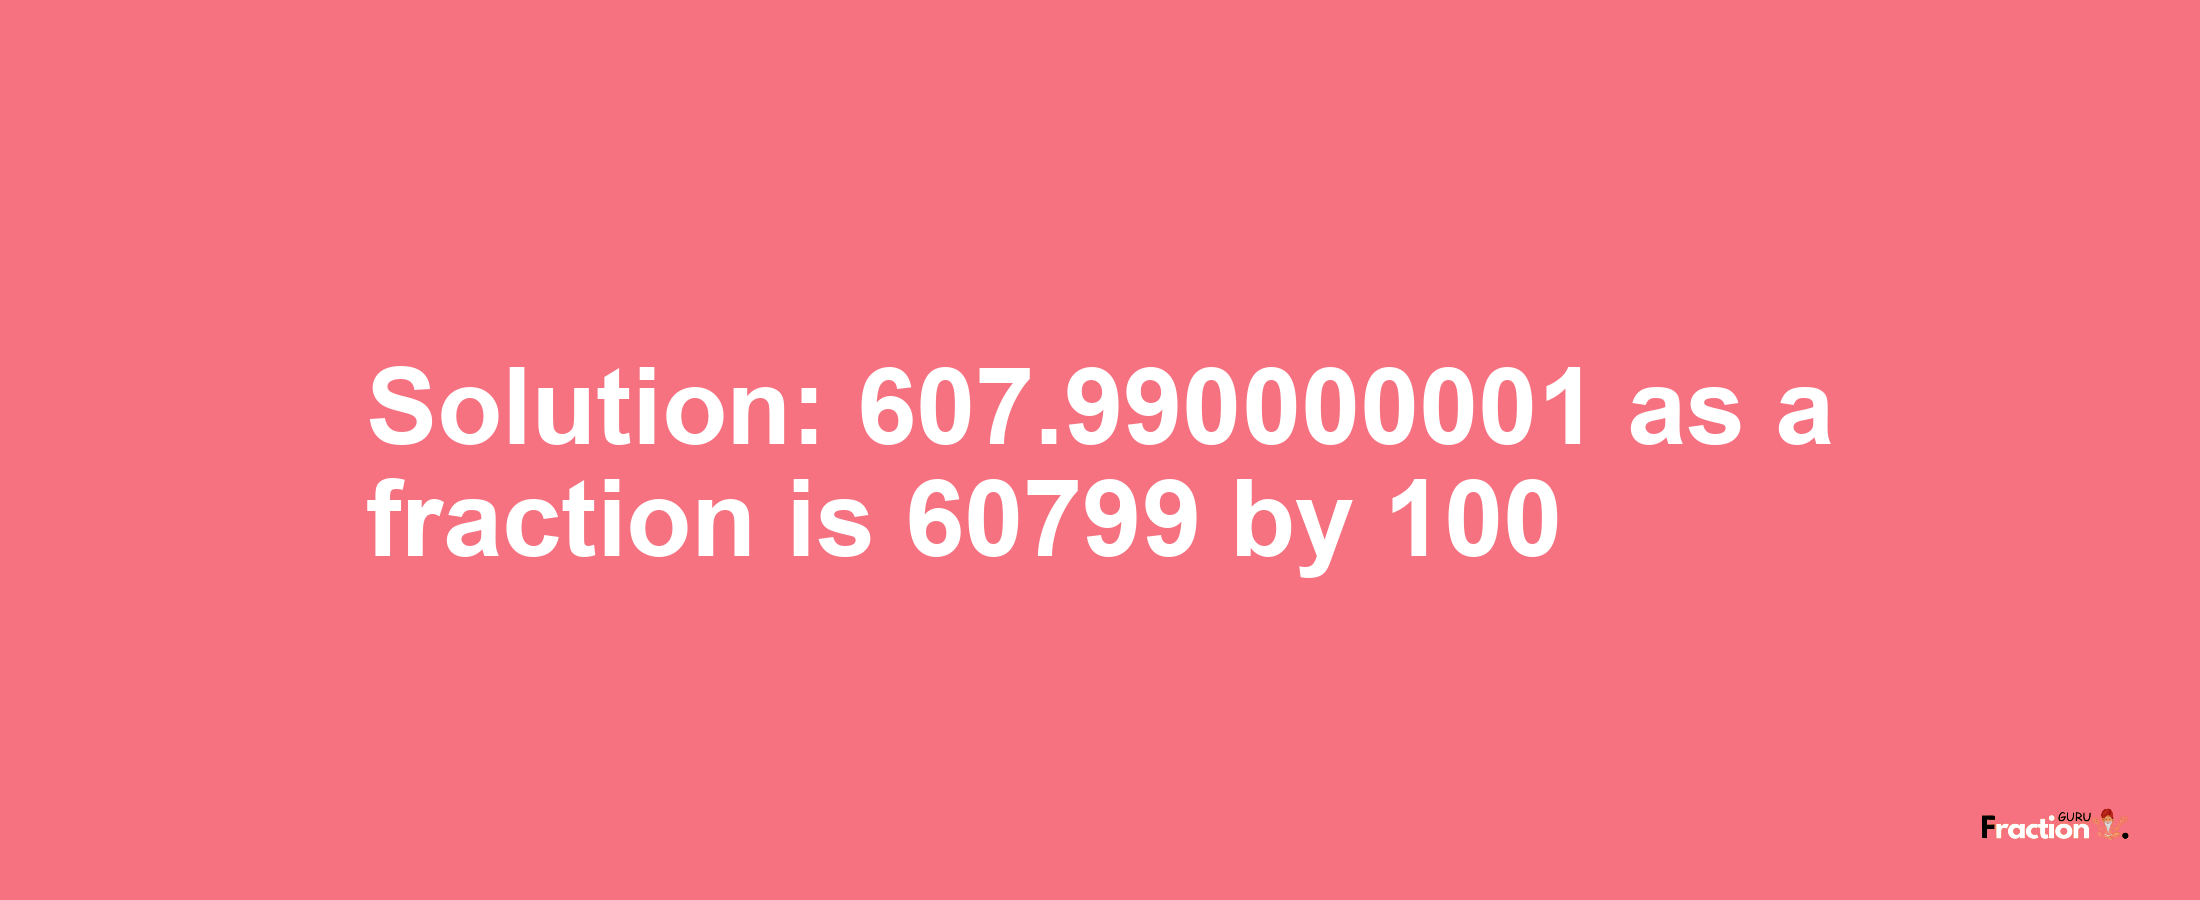 Solution:607.990000001 as a fraction is 60799/100